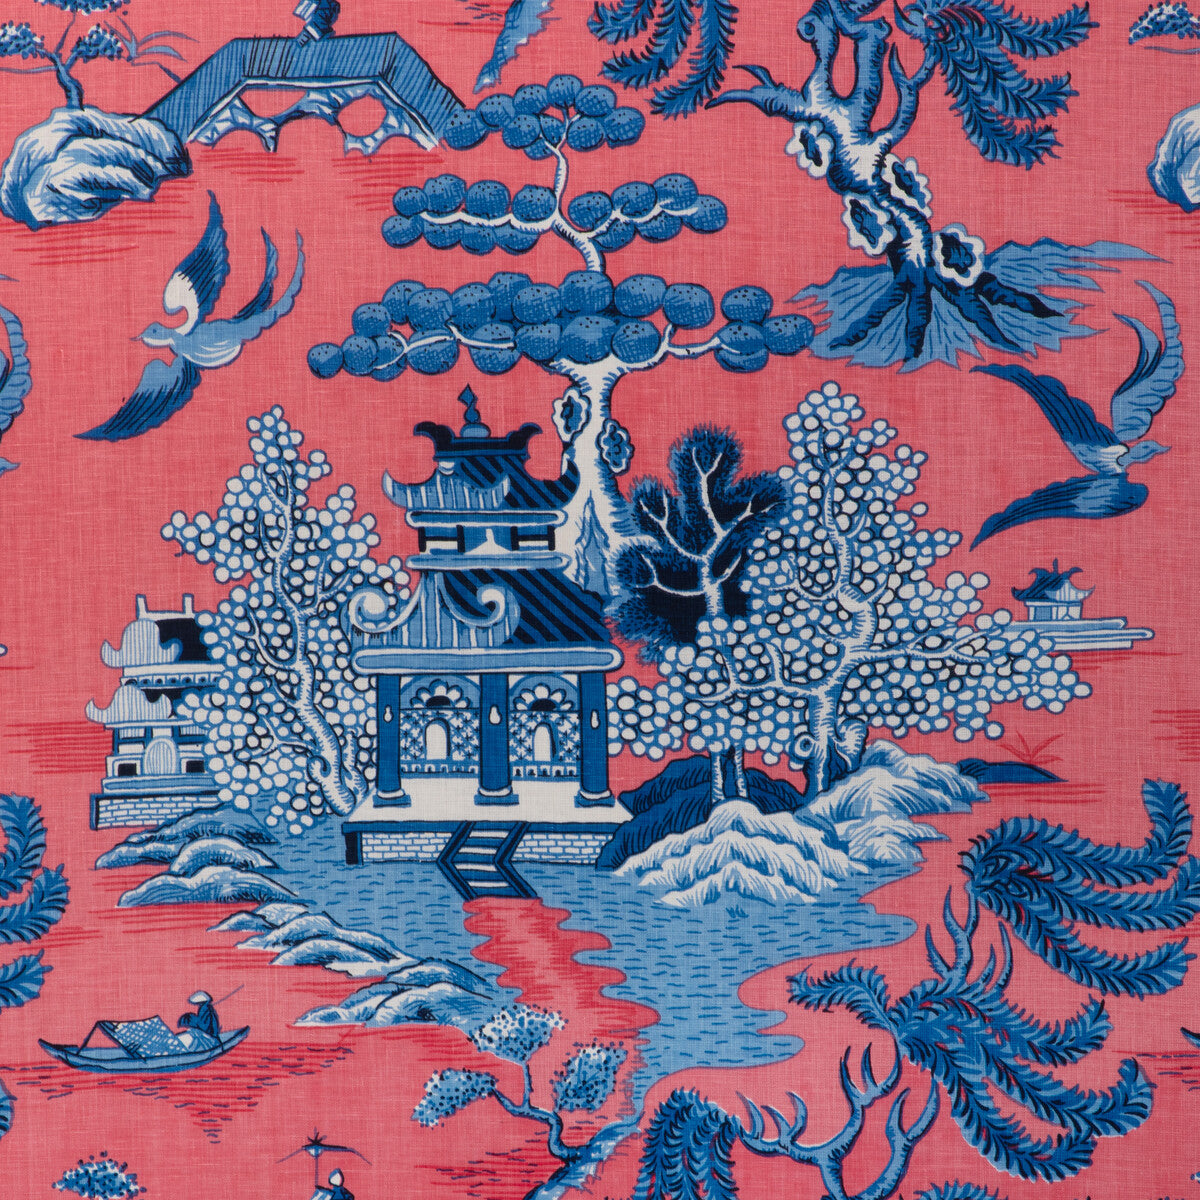 Willow Lake Print fabric in punch color - pattern 2023128.195.0 - by Lee Jofa in the Lee Jofa 200 collection